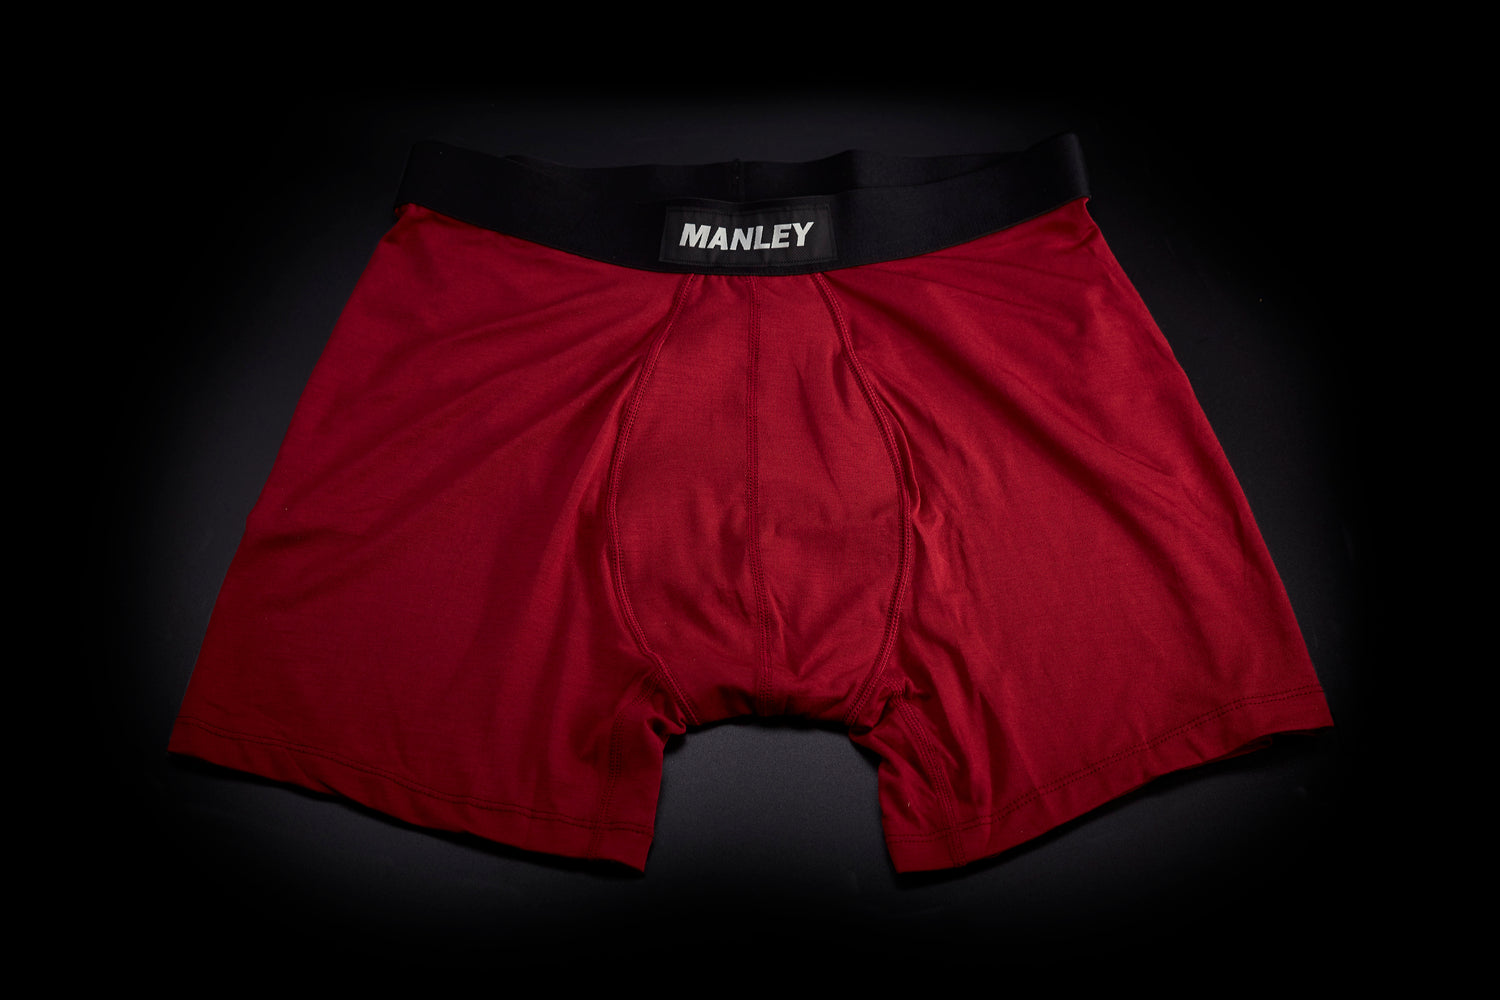 Comfortable Underwear that Stops the Pee Spot. – Manley Barrier